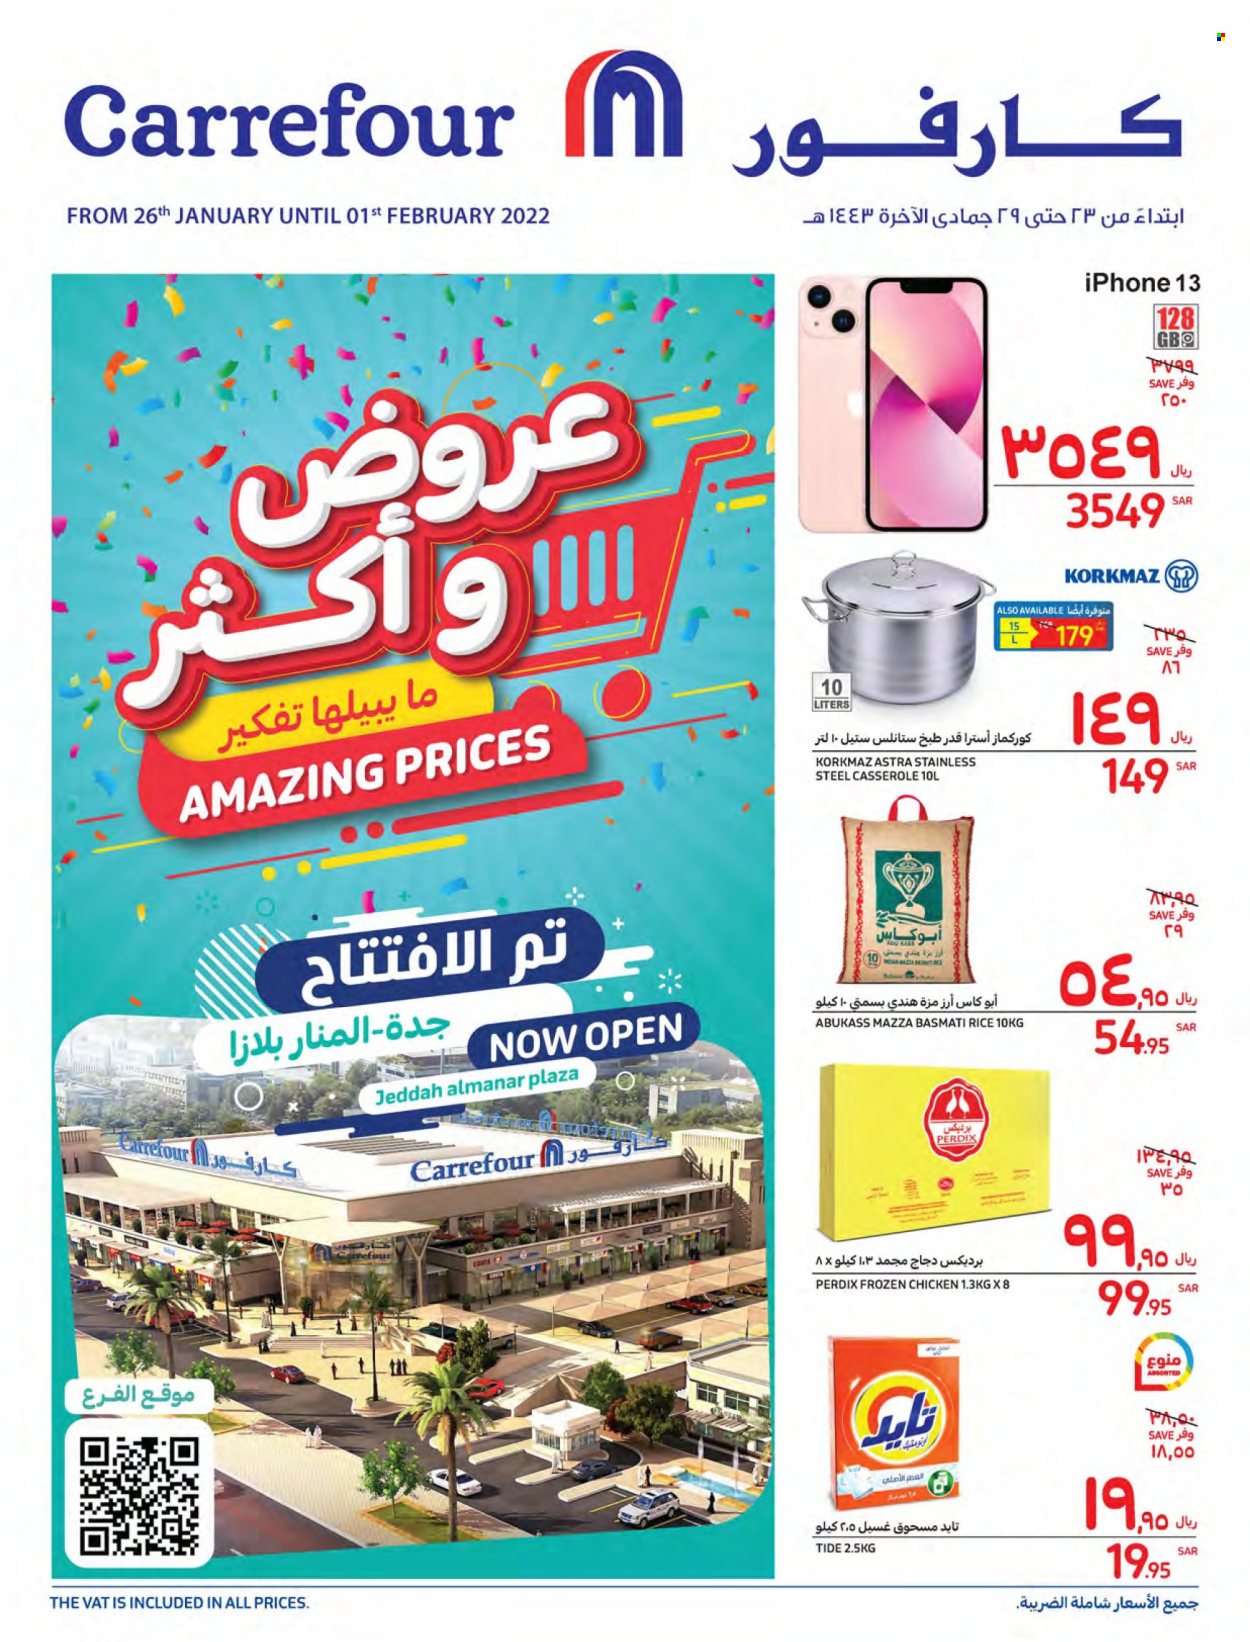 Carrefour flyer  - 01.26.2022 - 02.01.2022. Page 1.